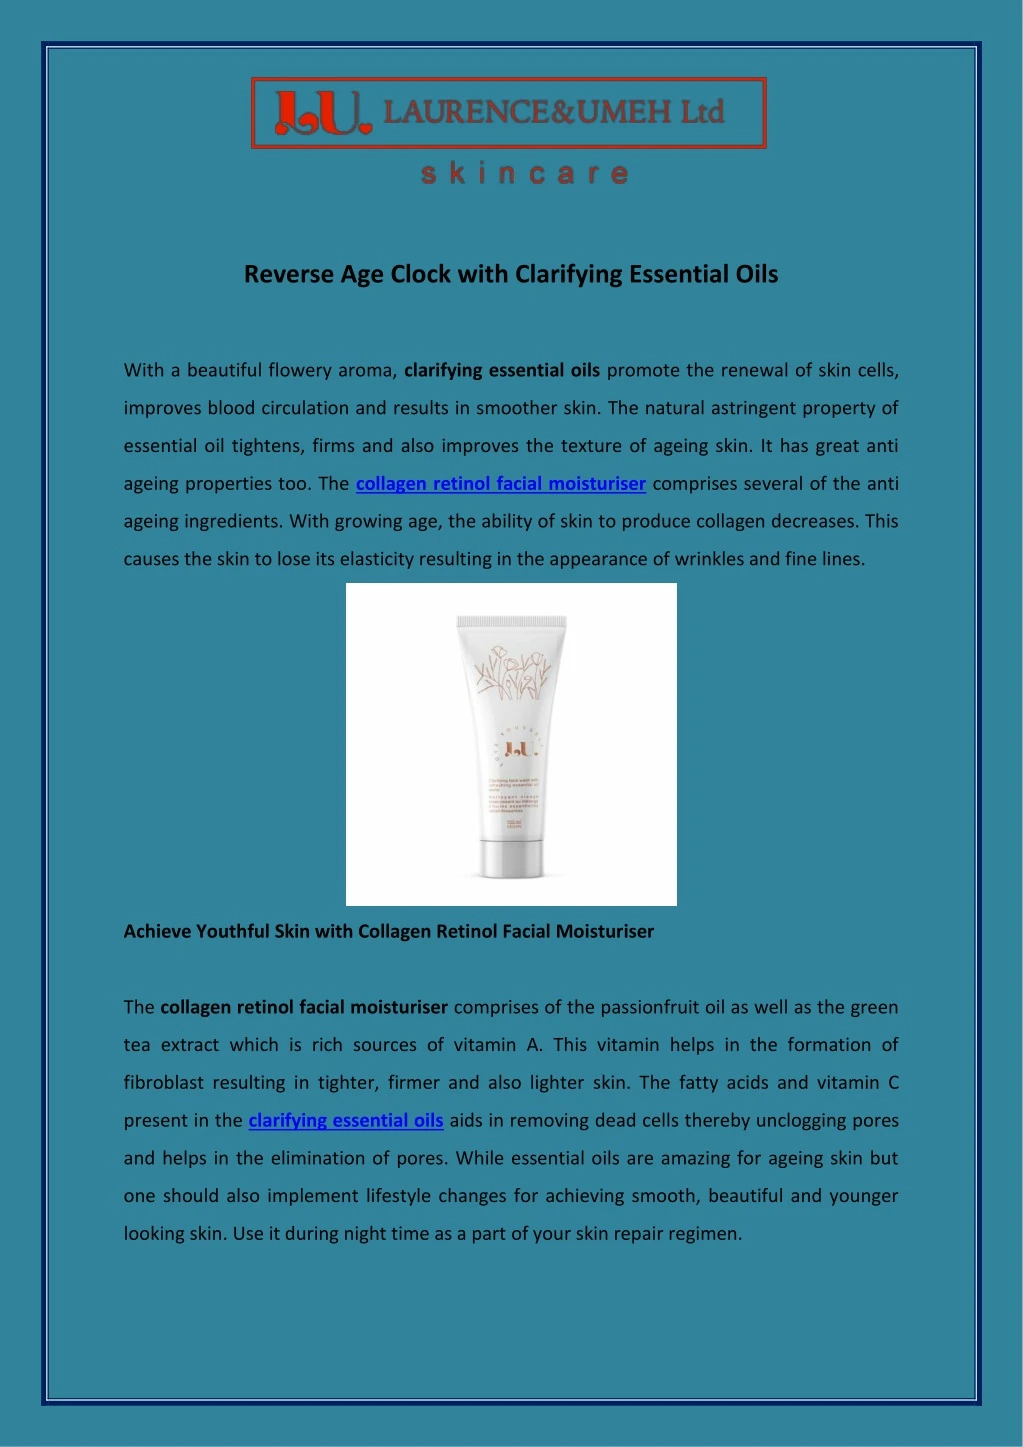 reverse age clock with clarifying essential oils